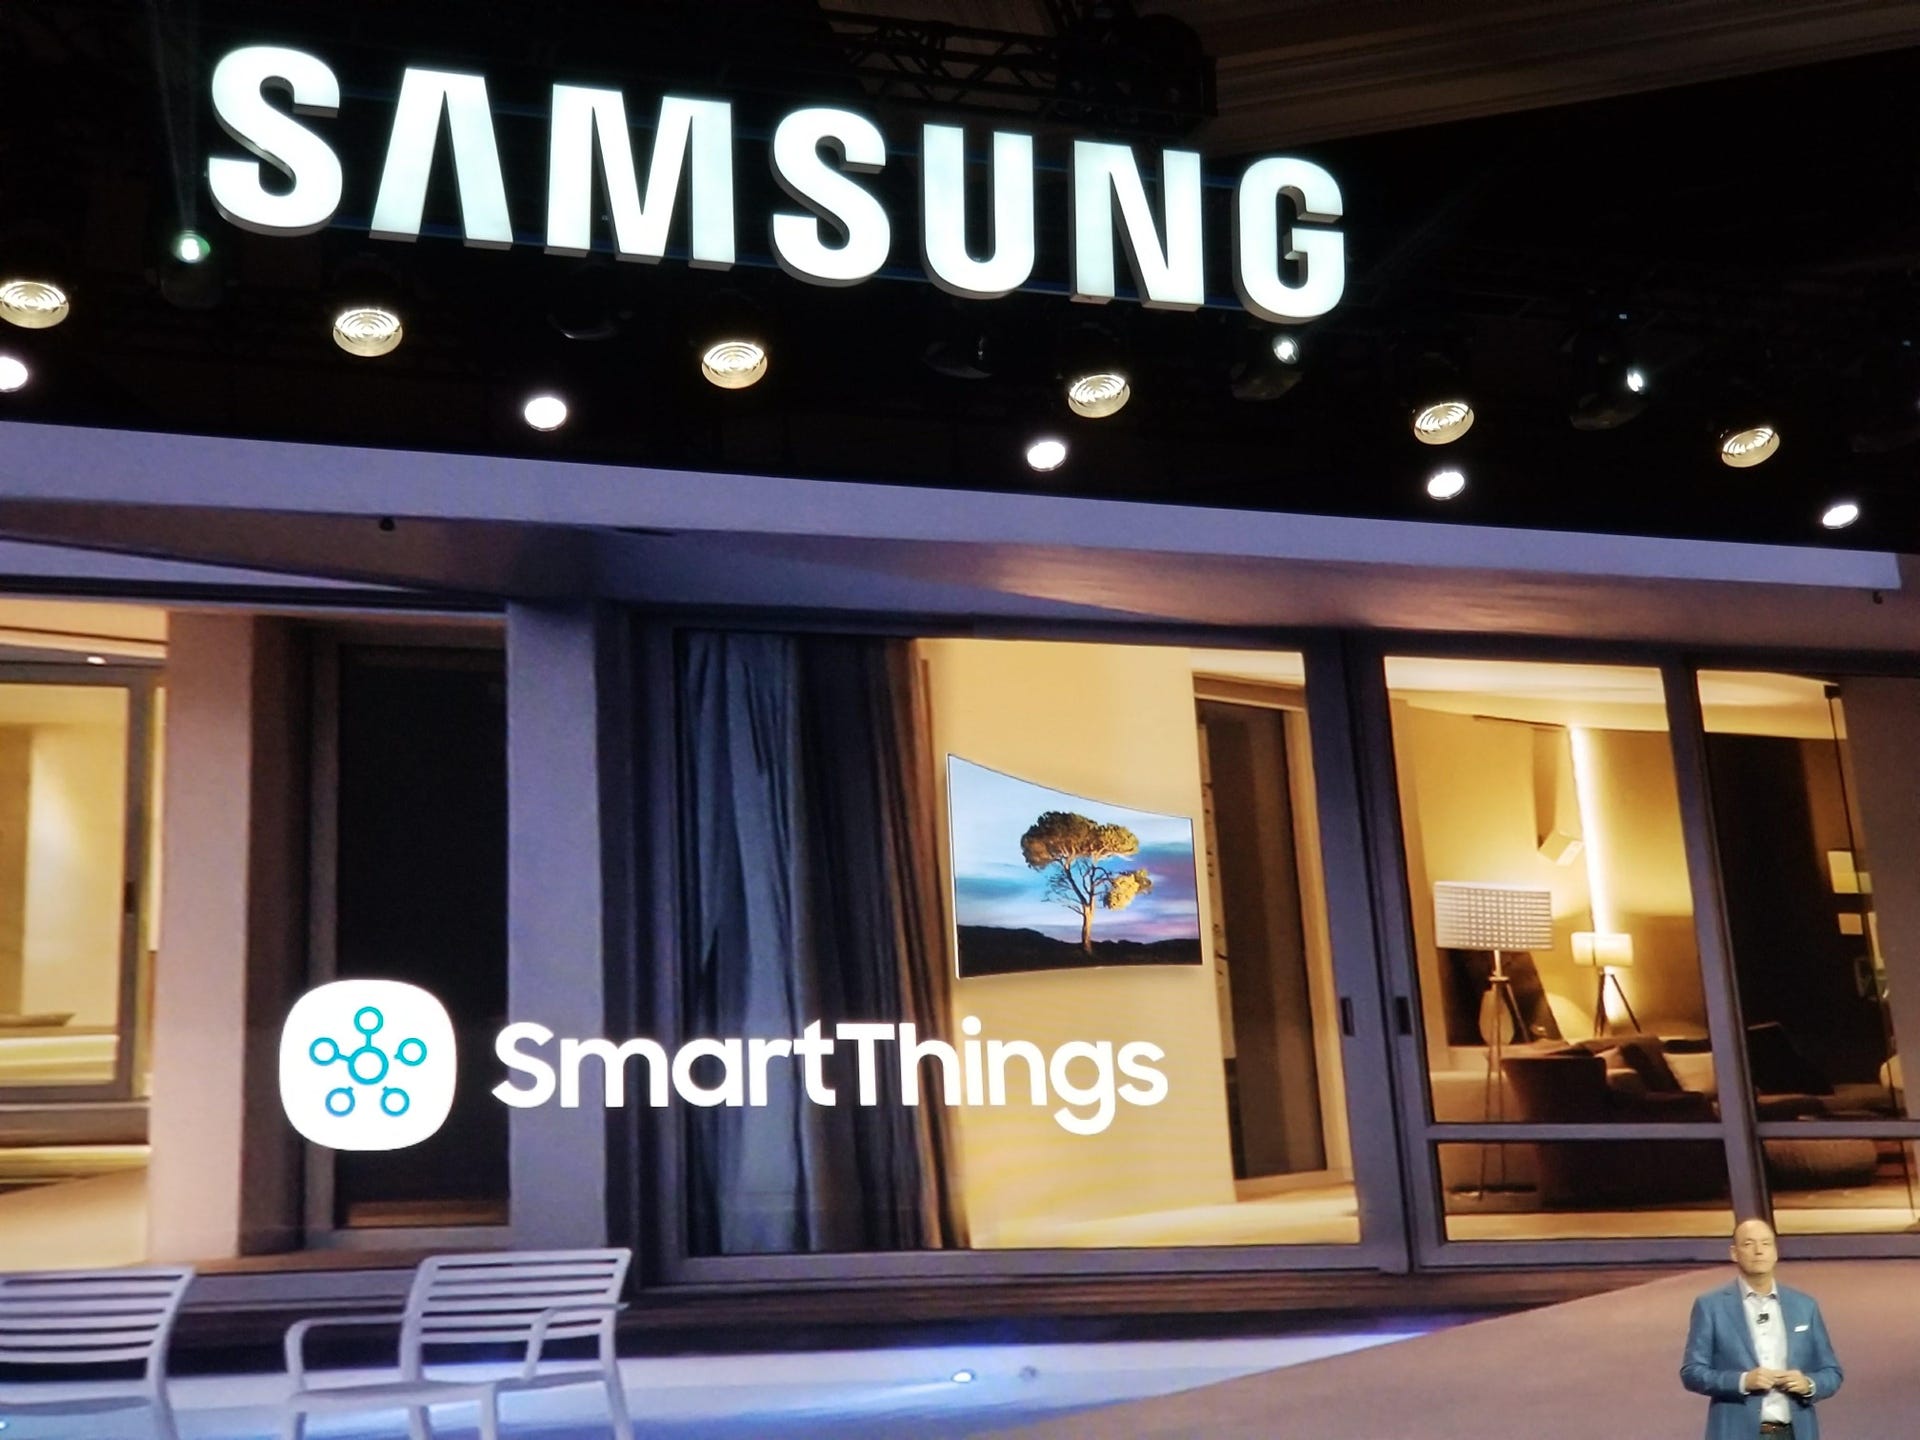 Samsung-SmartThings-CES-2018